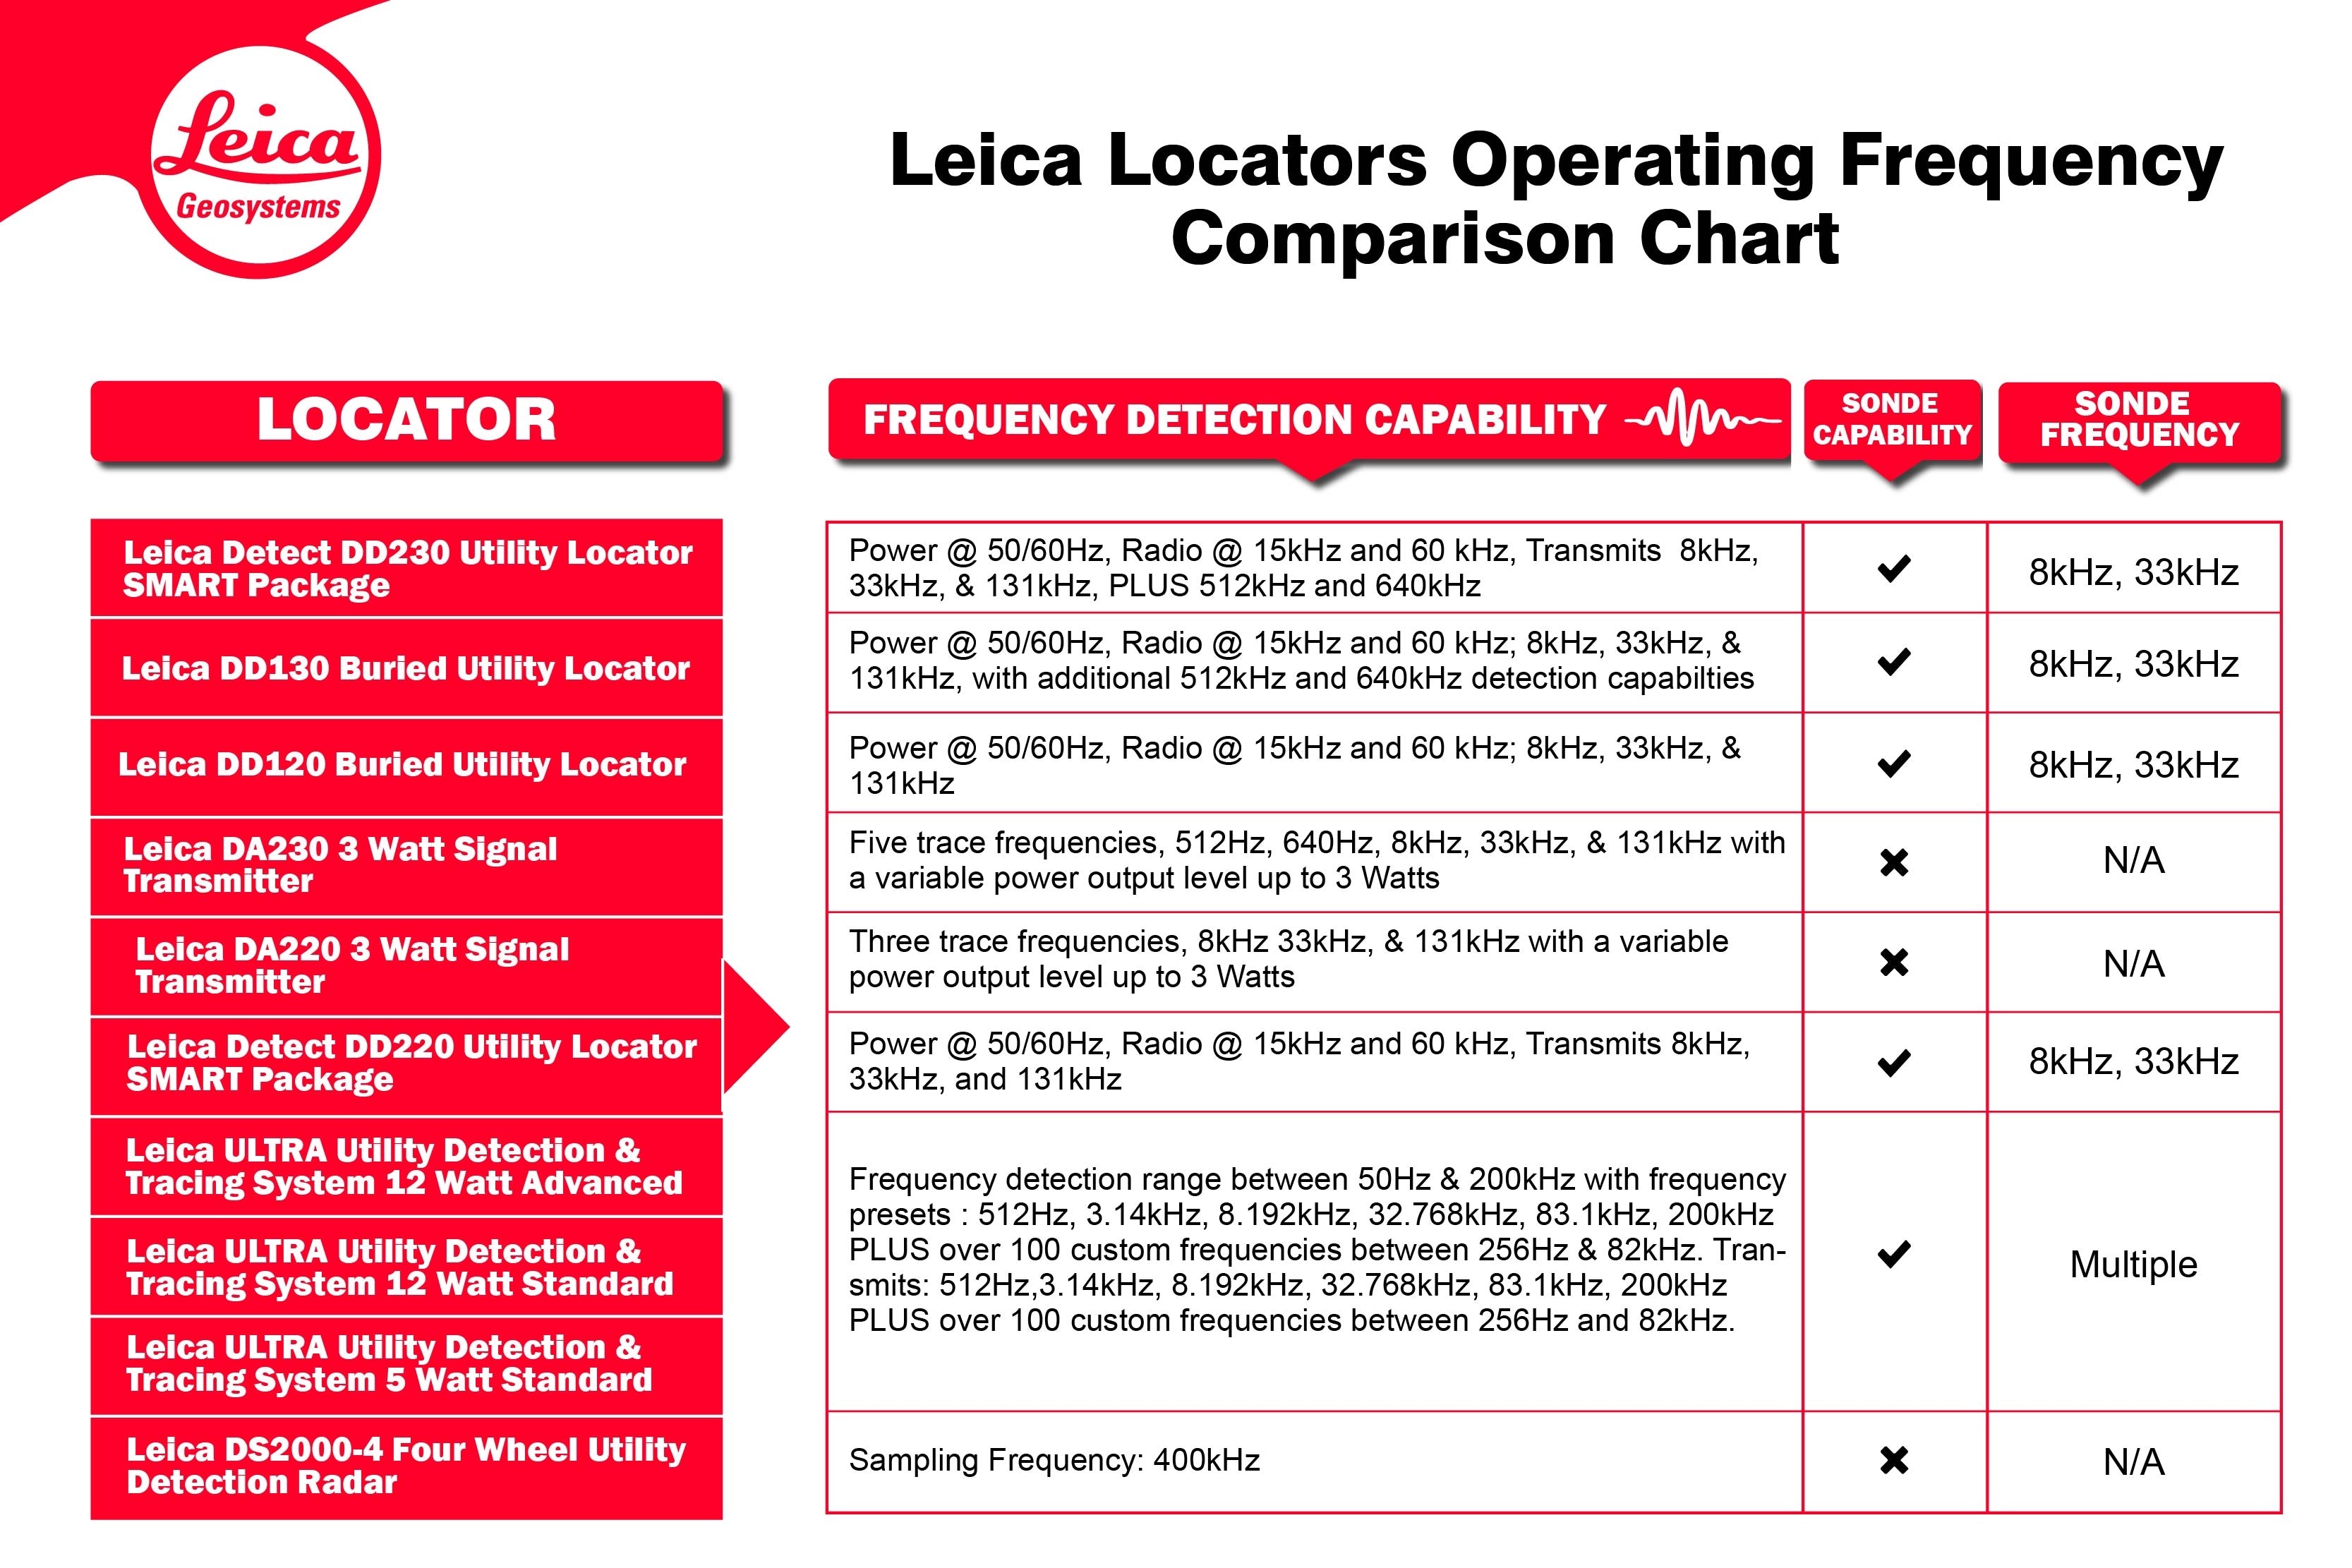 This chart provides an in depth comparison of the Leica Geosystems Utility Detection Radar, DD Utiltility Locator and Ultra Utility range of devices.